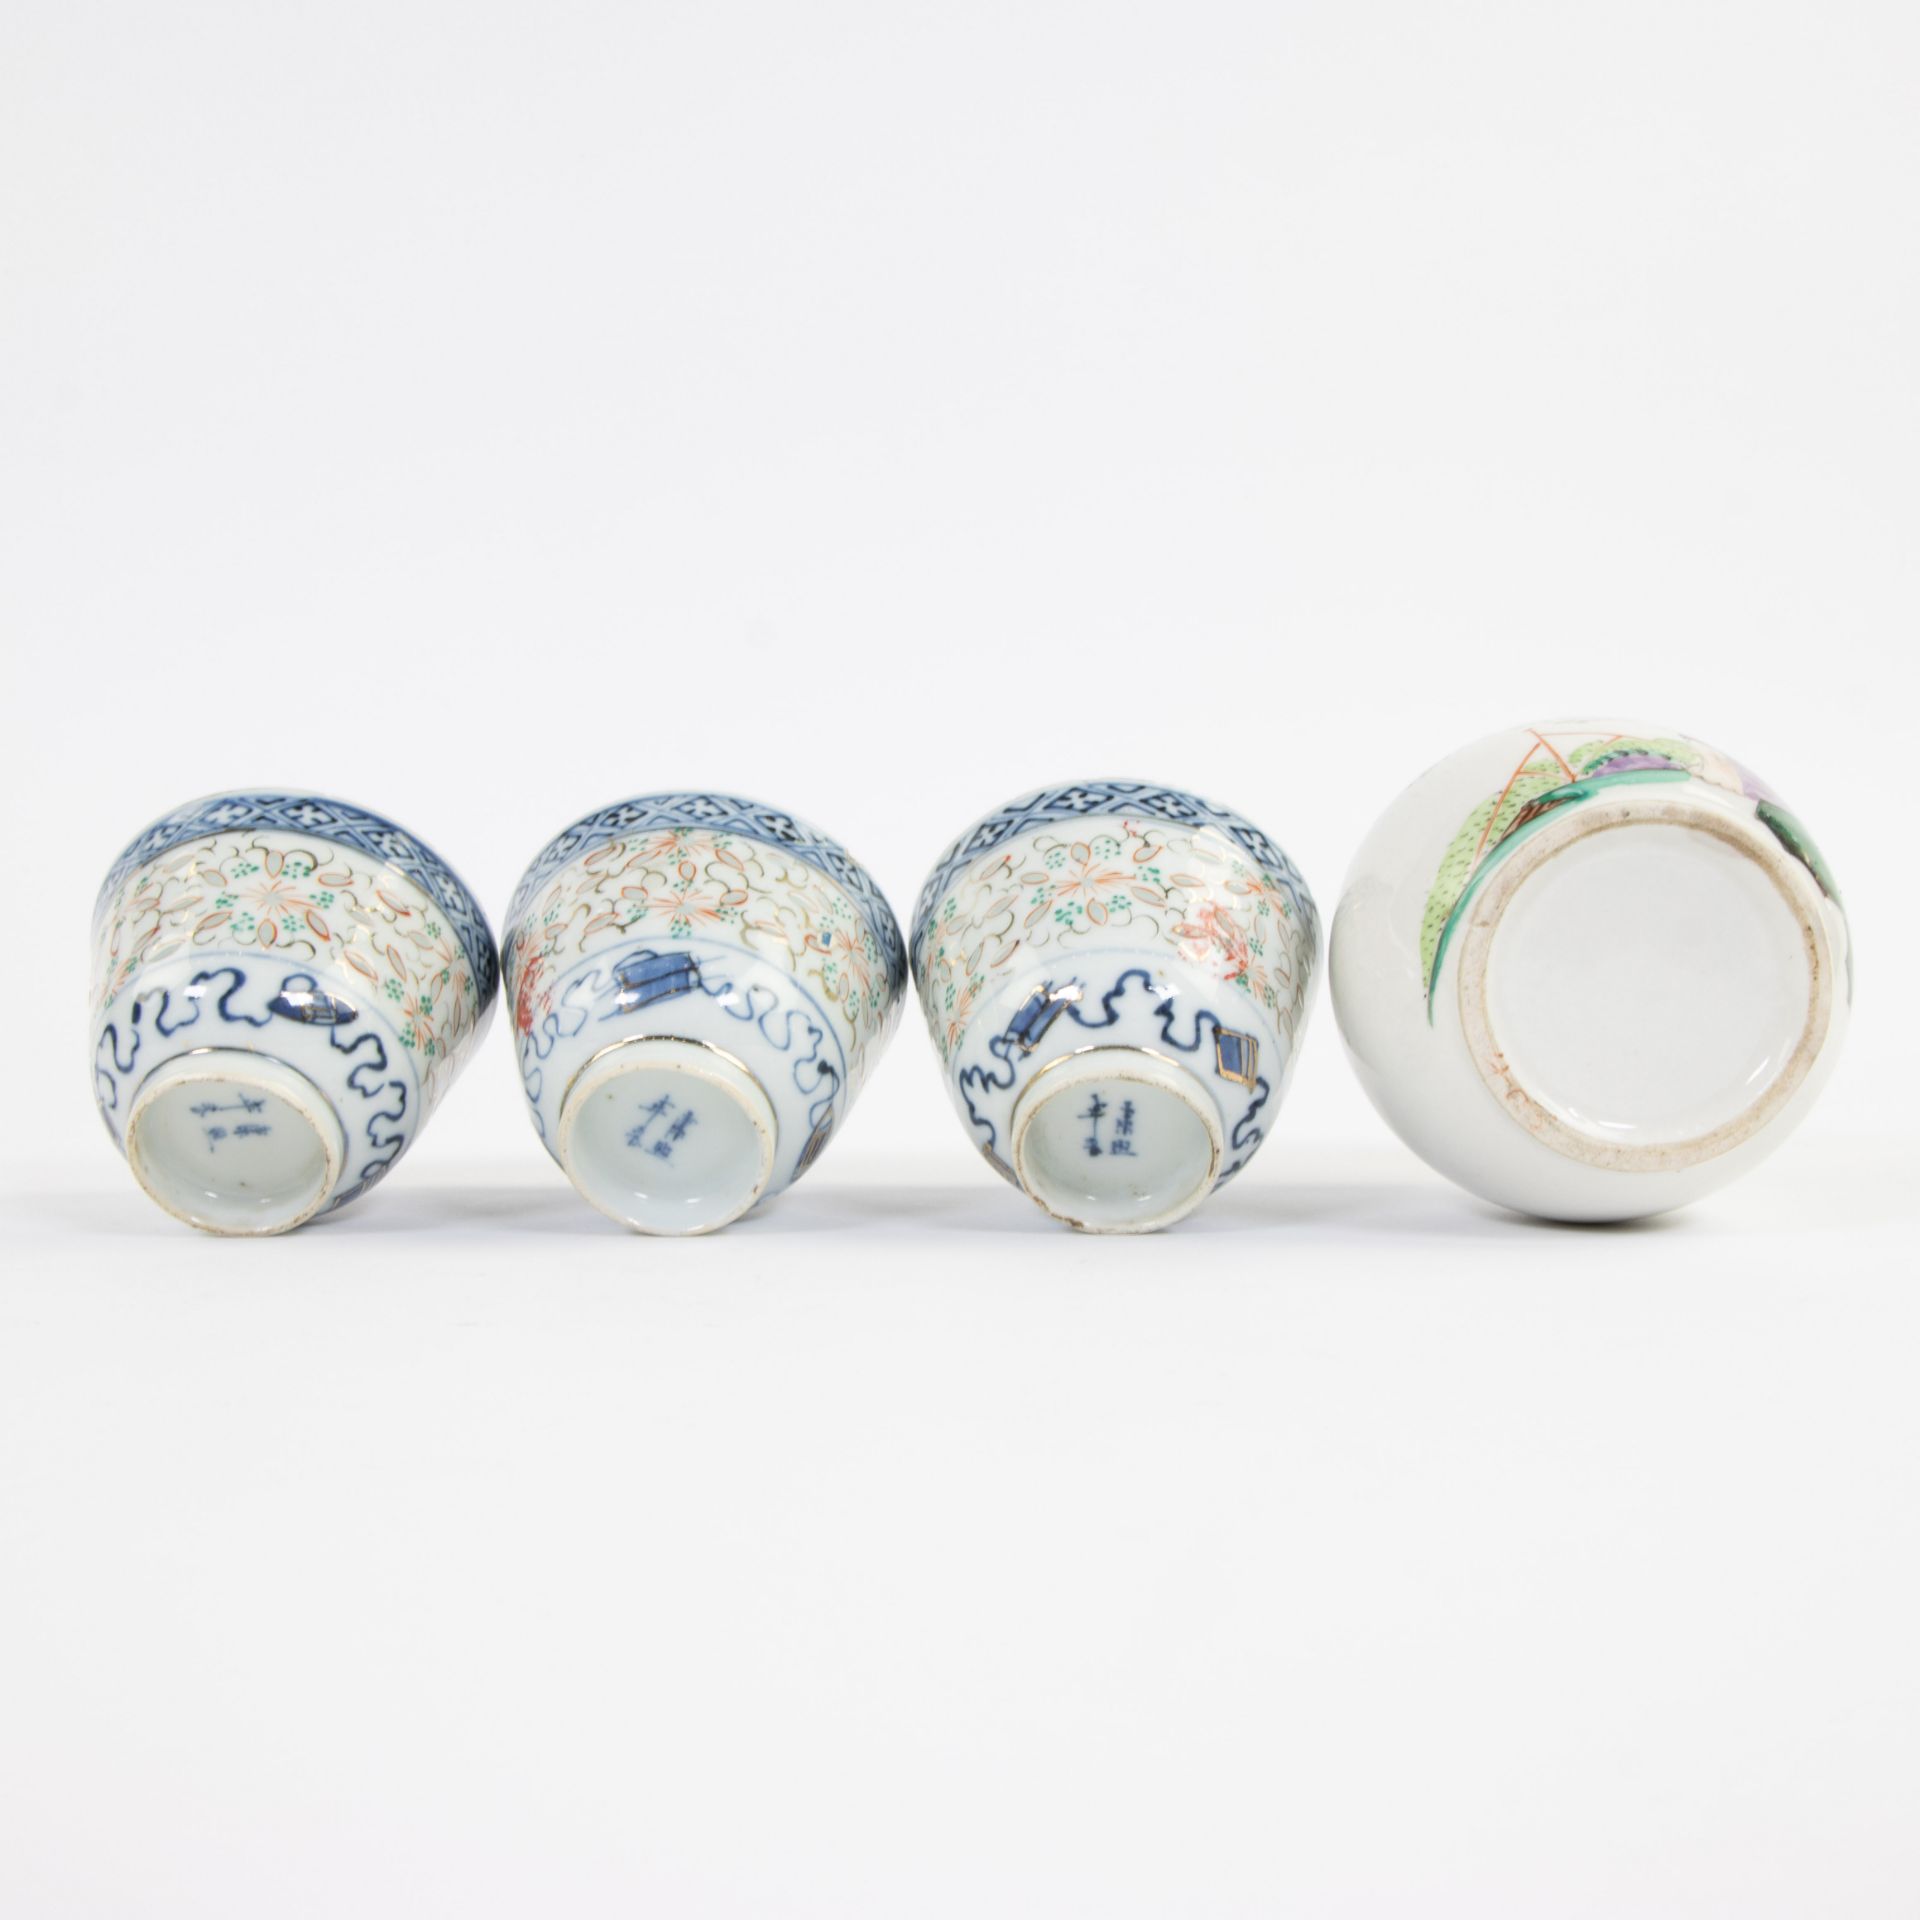 Collection of Chinese porcelain: plates, bowls and vase - Image 10 of 10